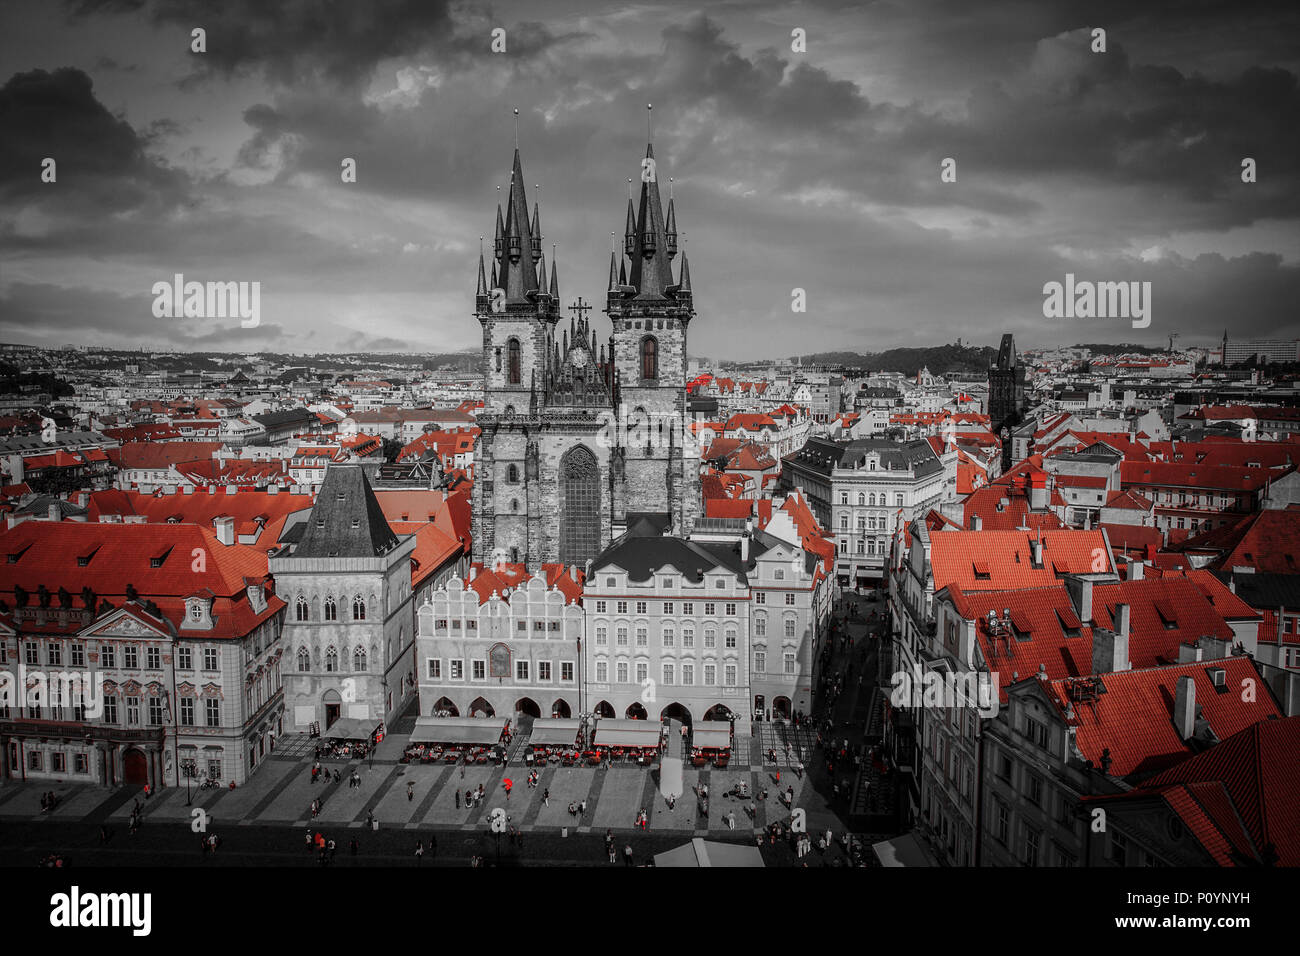 Prague Old town square, Tyn Cathedral. under sunlight. black and white photo with red color. Stock Photo